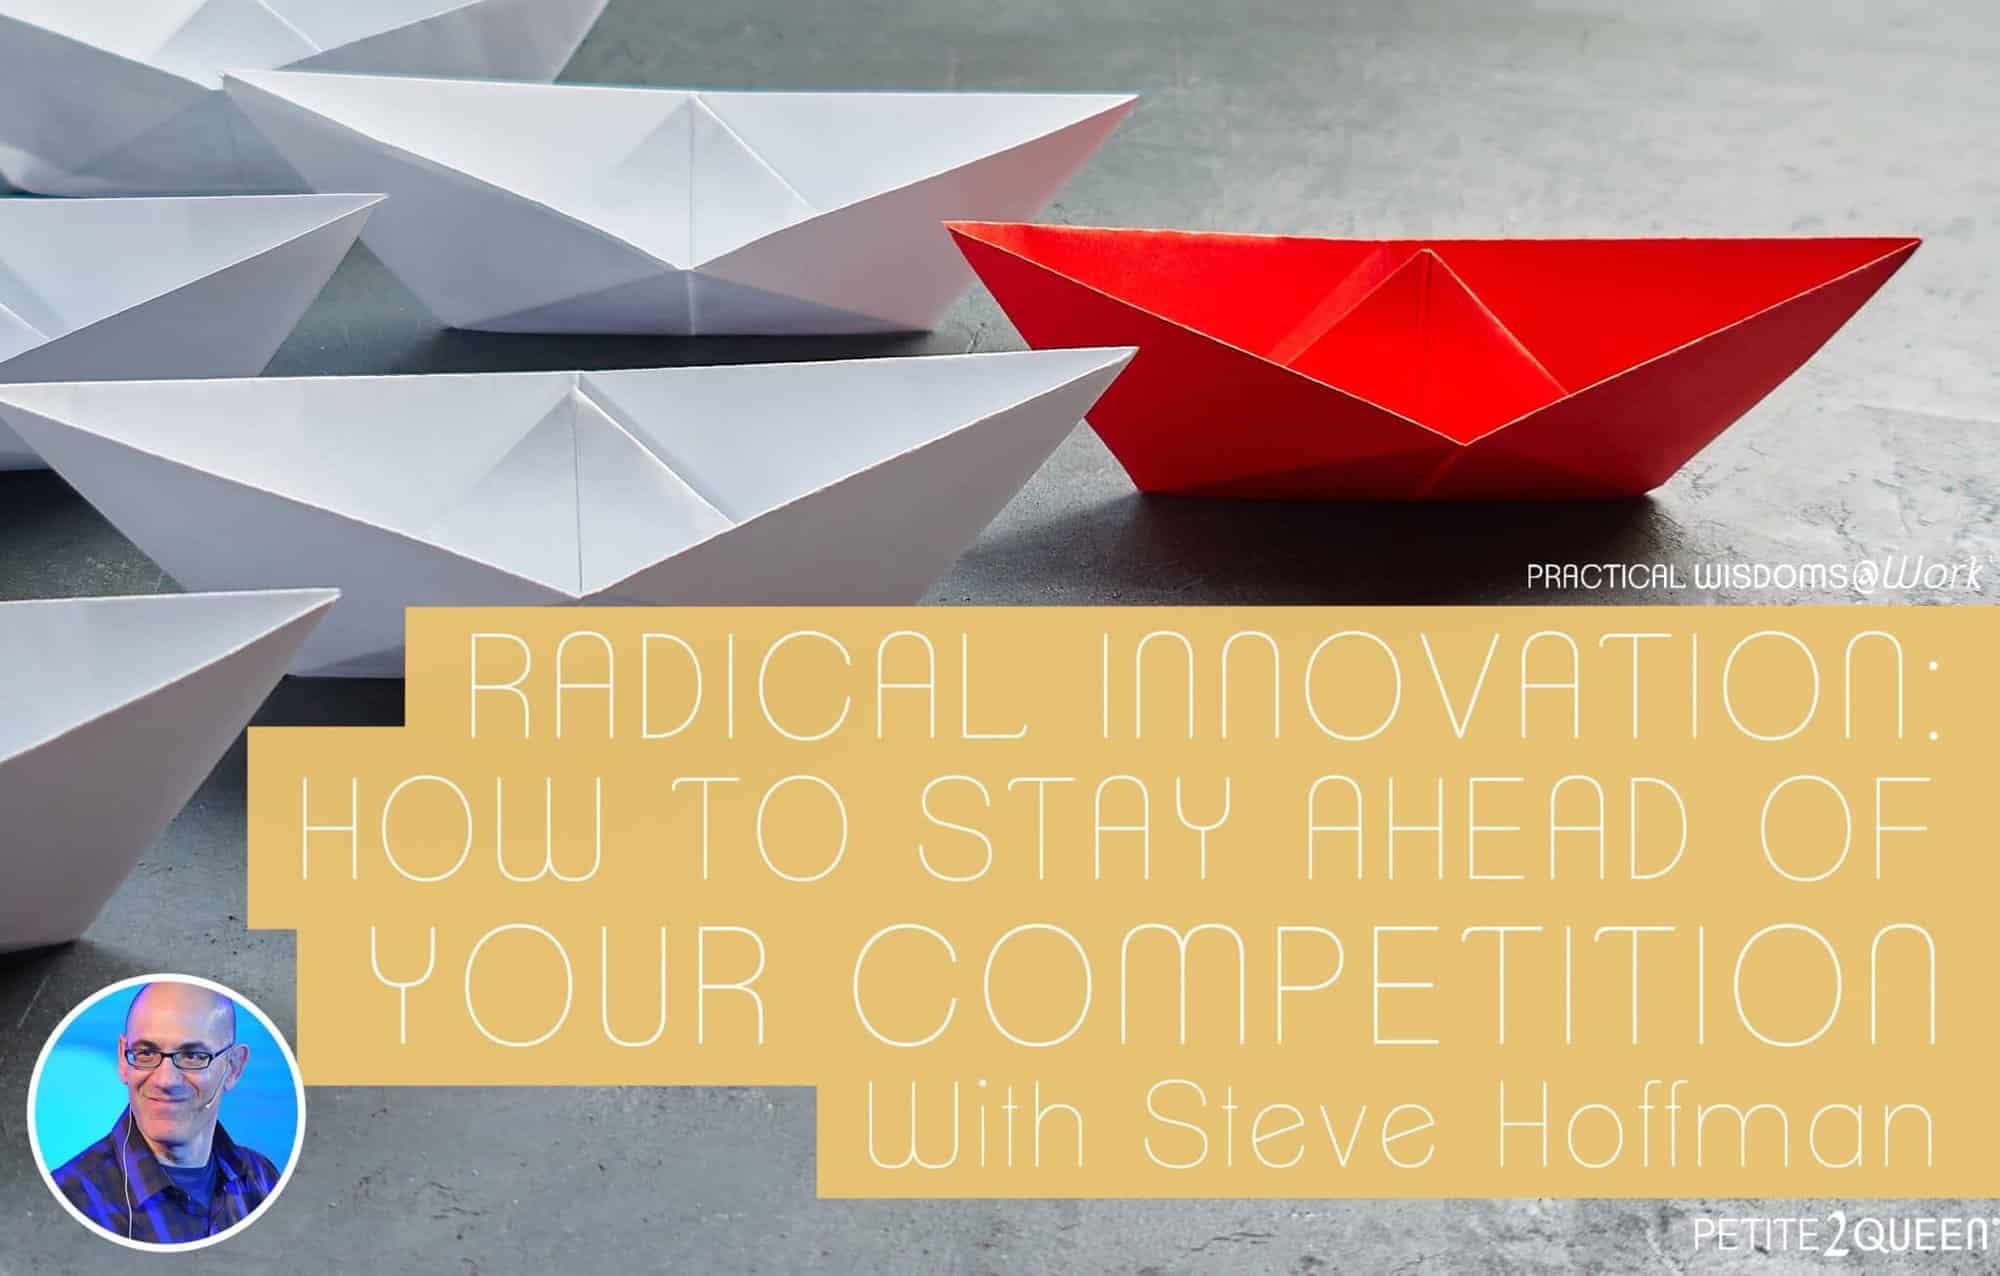 https://petite2queen.com/wp-content/uploads/2021/11/Radical-Innovation-How-to-Stay-Ahead-of-Your-Competition-Steve-Hoffman-scaled.jpg